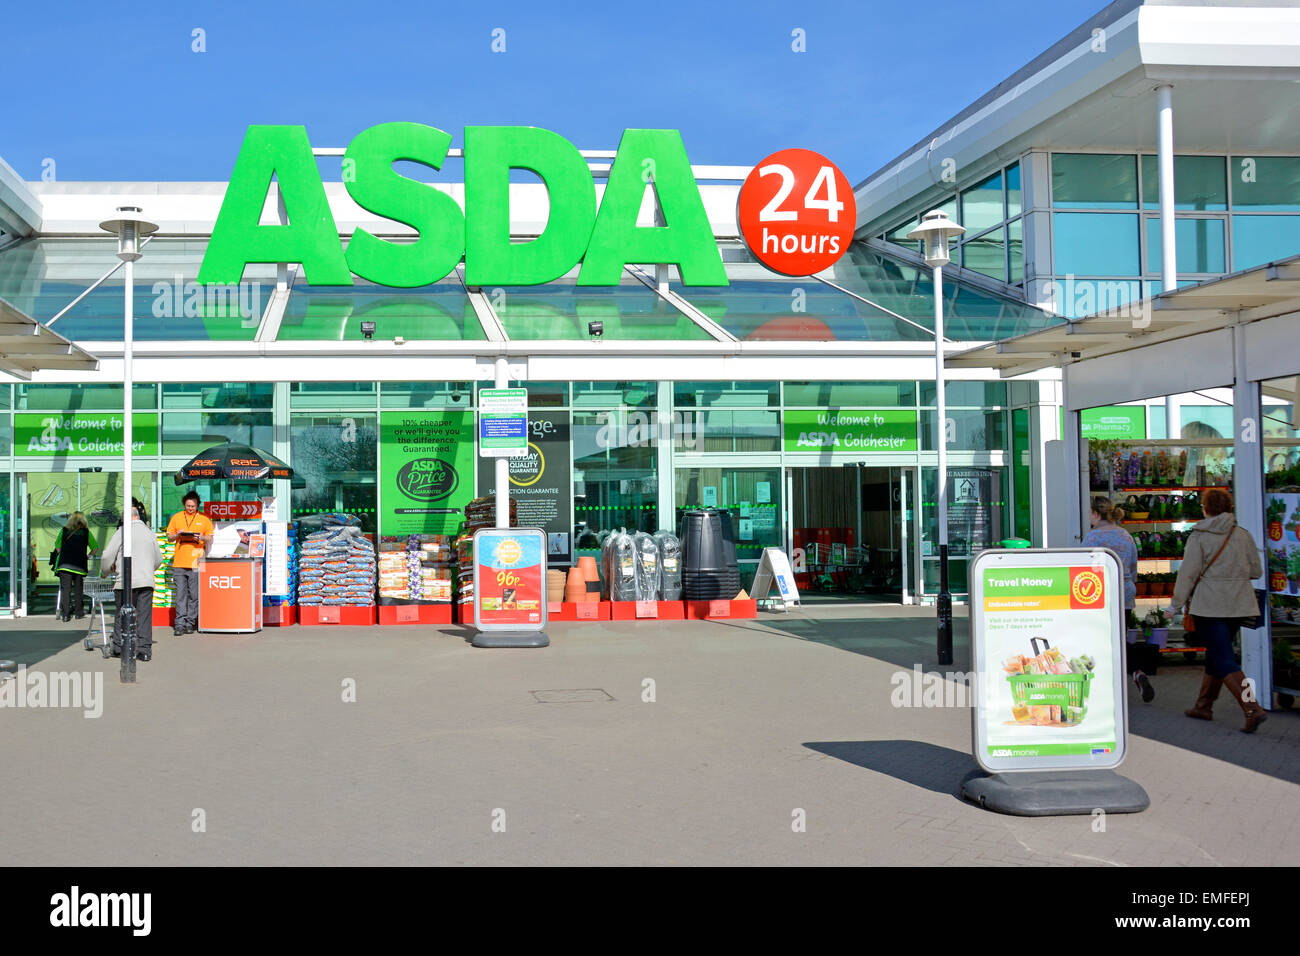 Shoppers at main entrance to Asda food & George clothing supermarket shopping retail store business with 24 hours sign Colchester Essex England UK Stock Photo